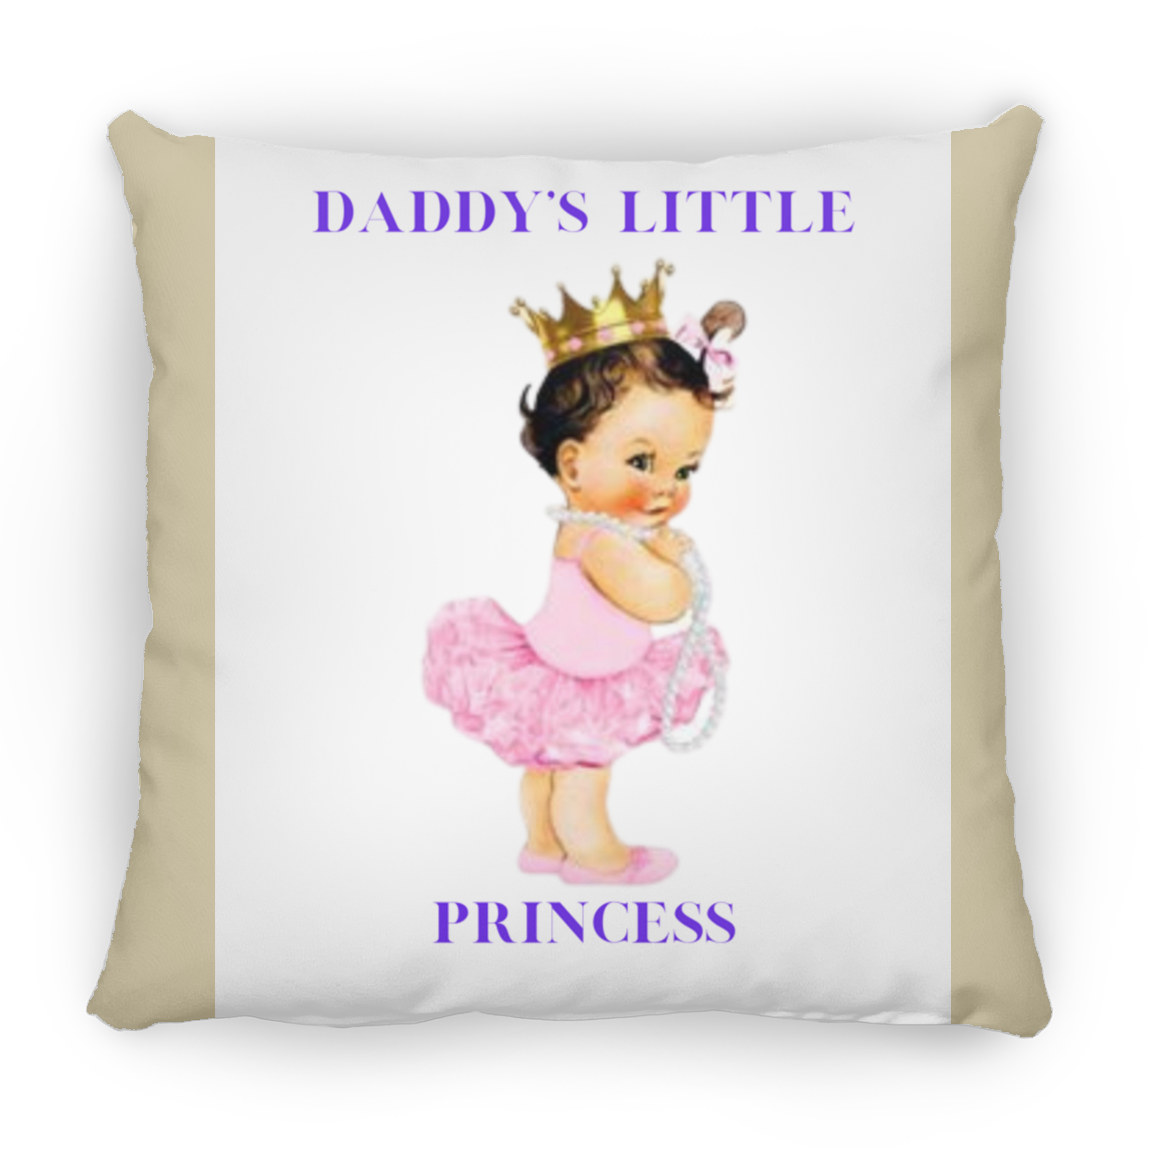 Daddy's Little Girl Large Square Pillow